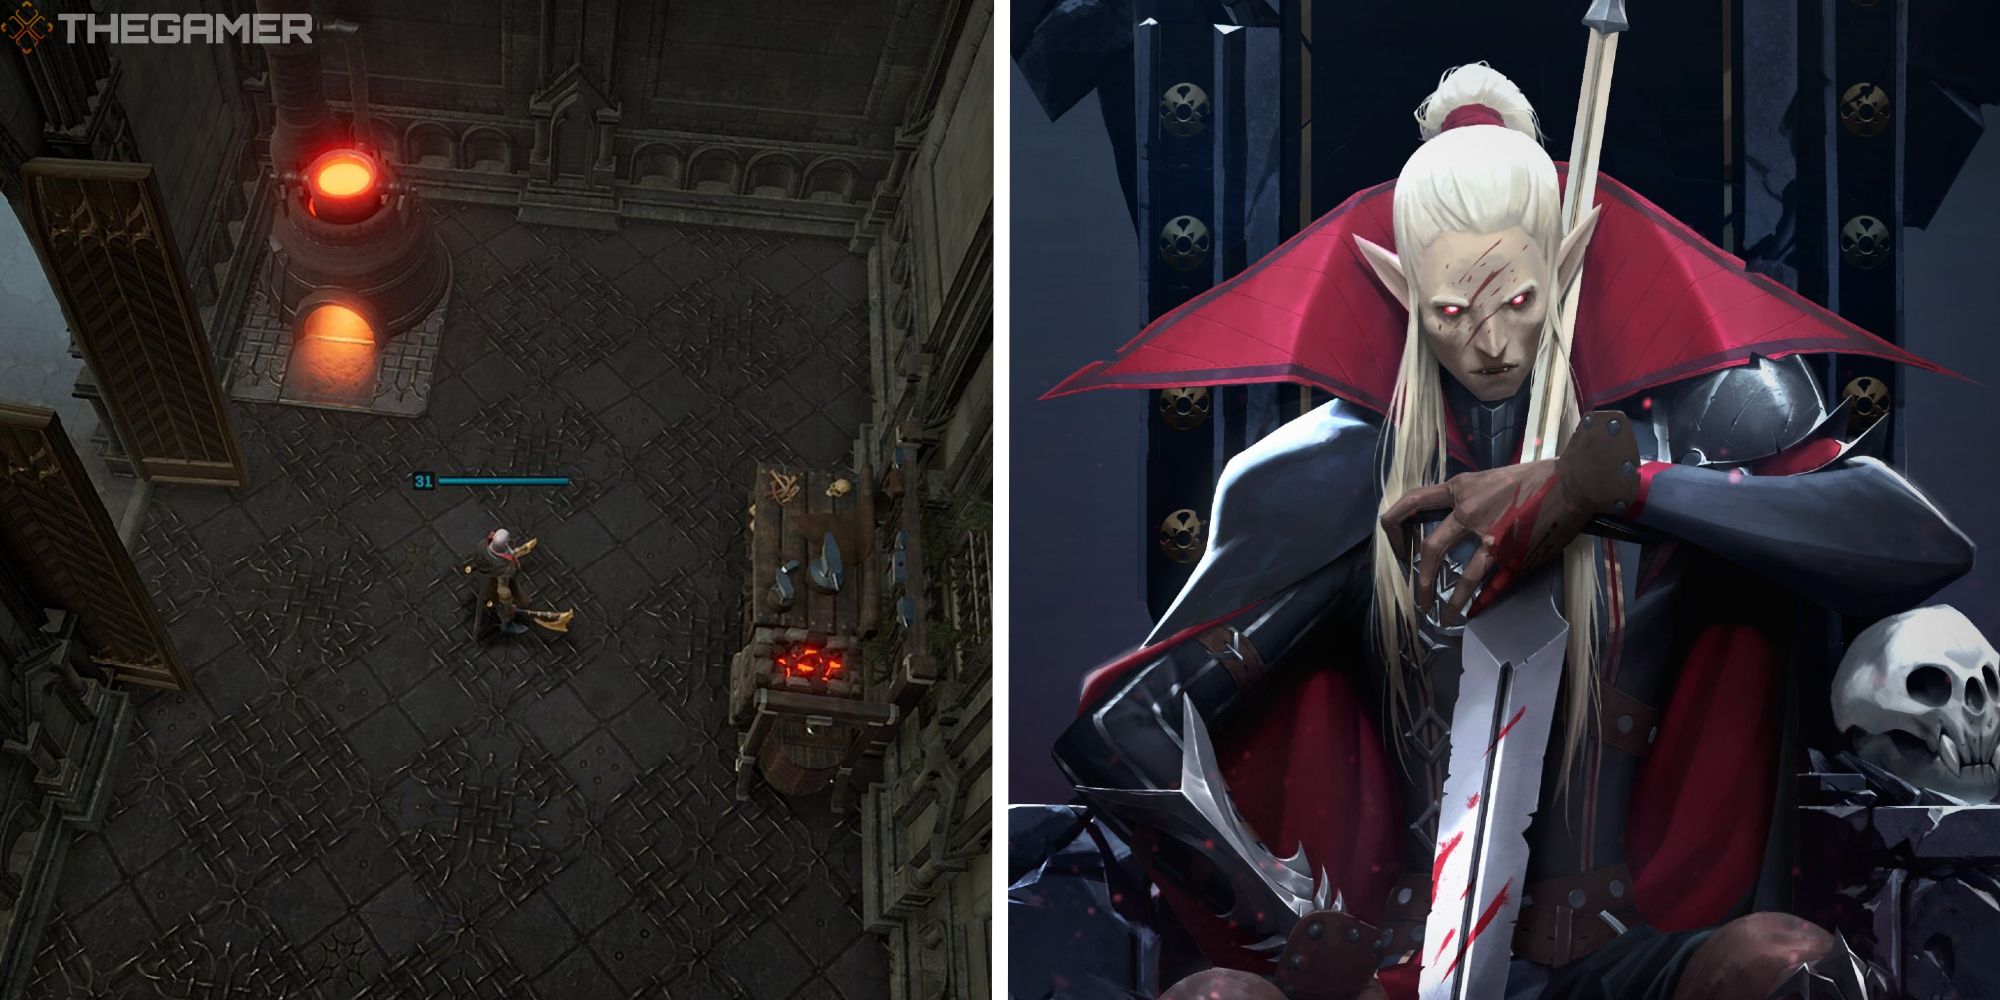 image of player in forge room next to image of promotional art for v rising